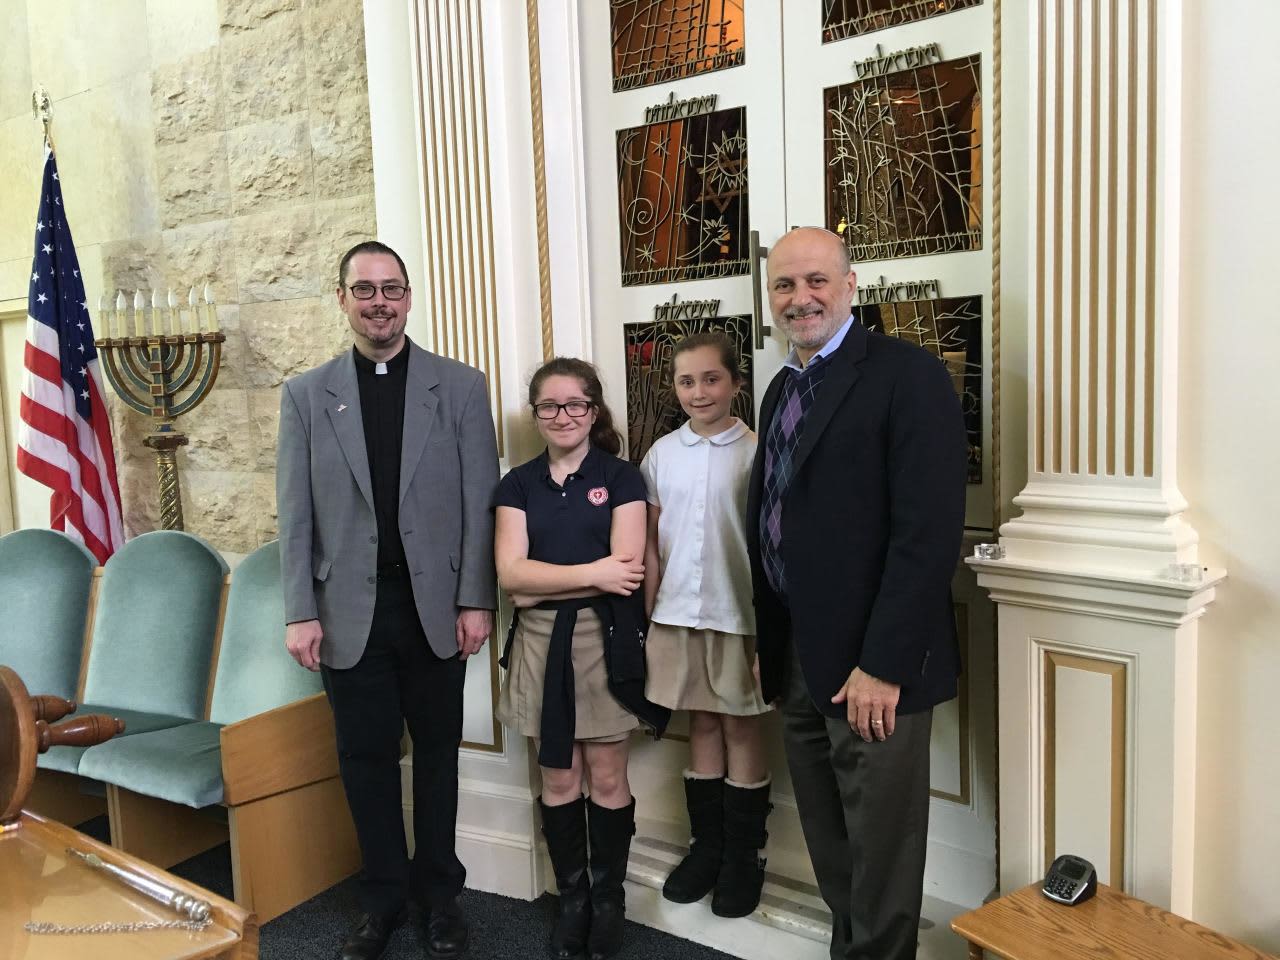 These Chapel School sisters served as "Pastors for the Day" at Village Lutheran Church in Bronxville.